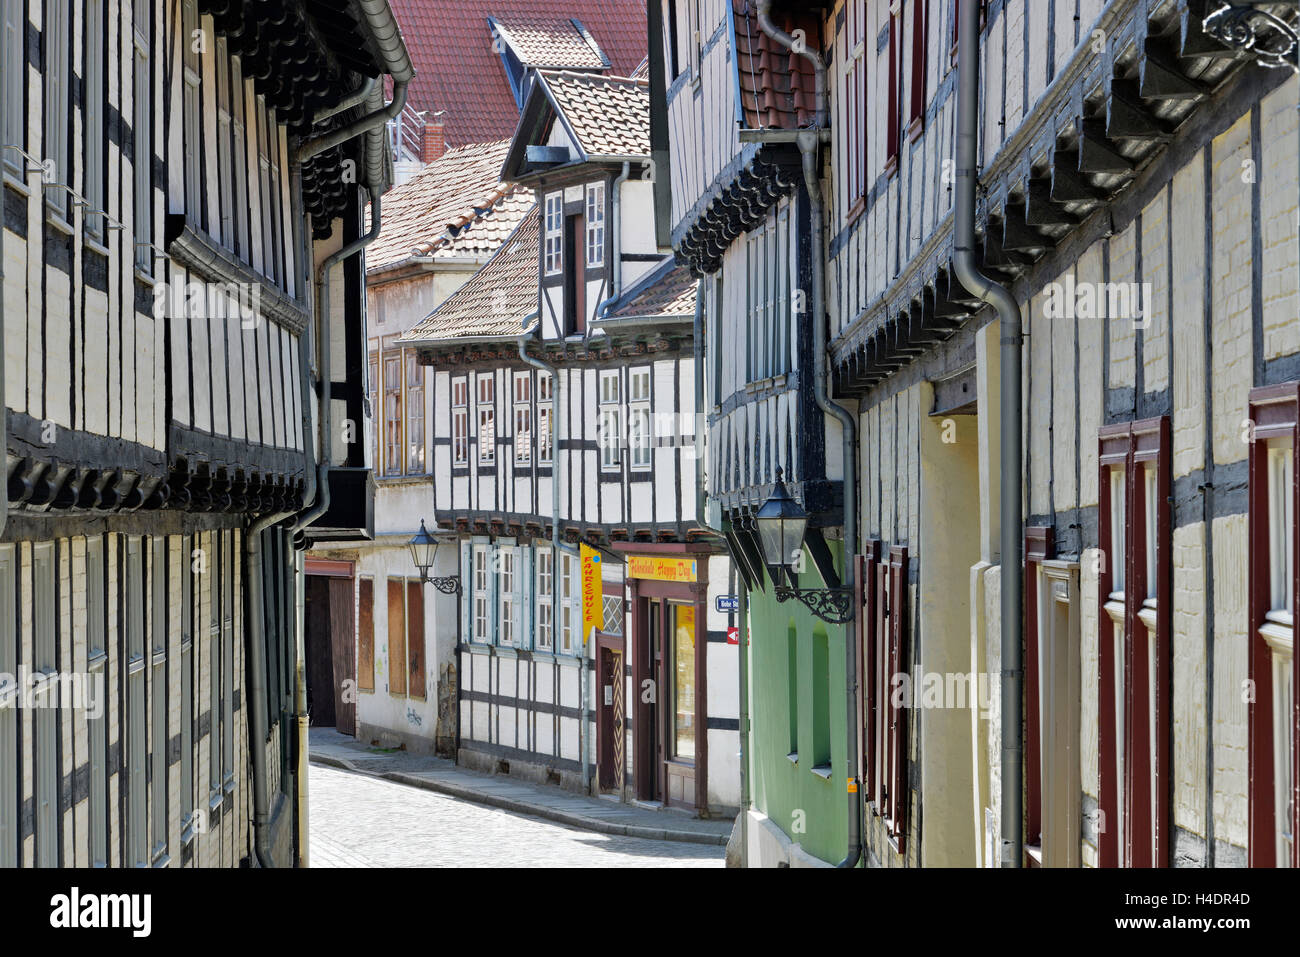 Germany, Saxony-Anhalt, Quedlinburg, historical Old Town, narrow lane with half-timbered houses, UNESCO world heritage Stock Photo